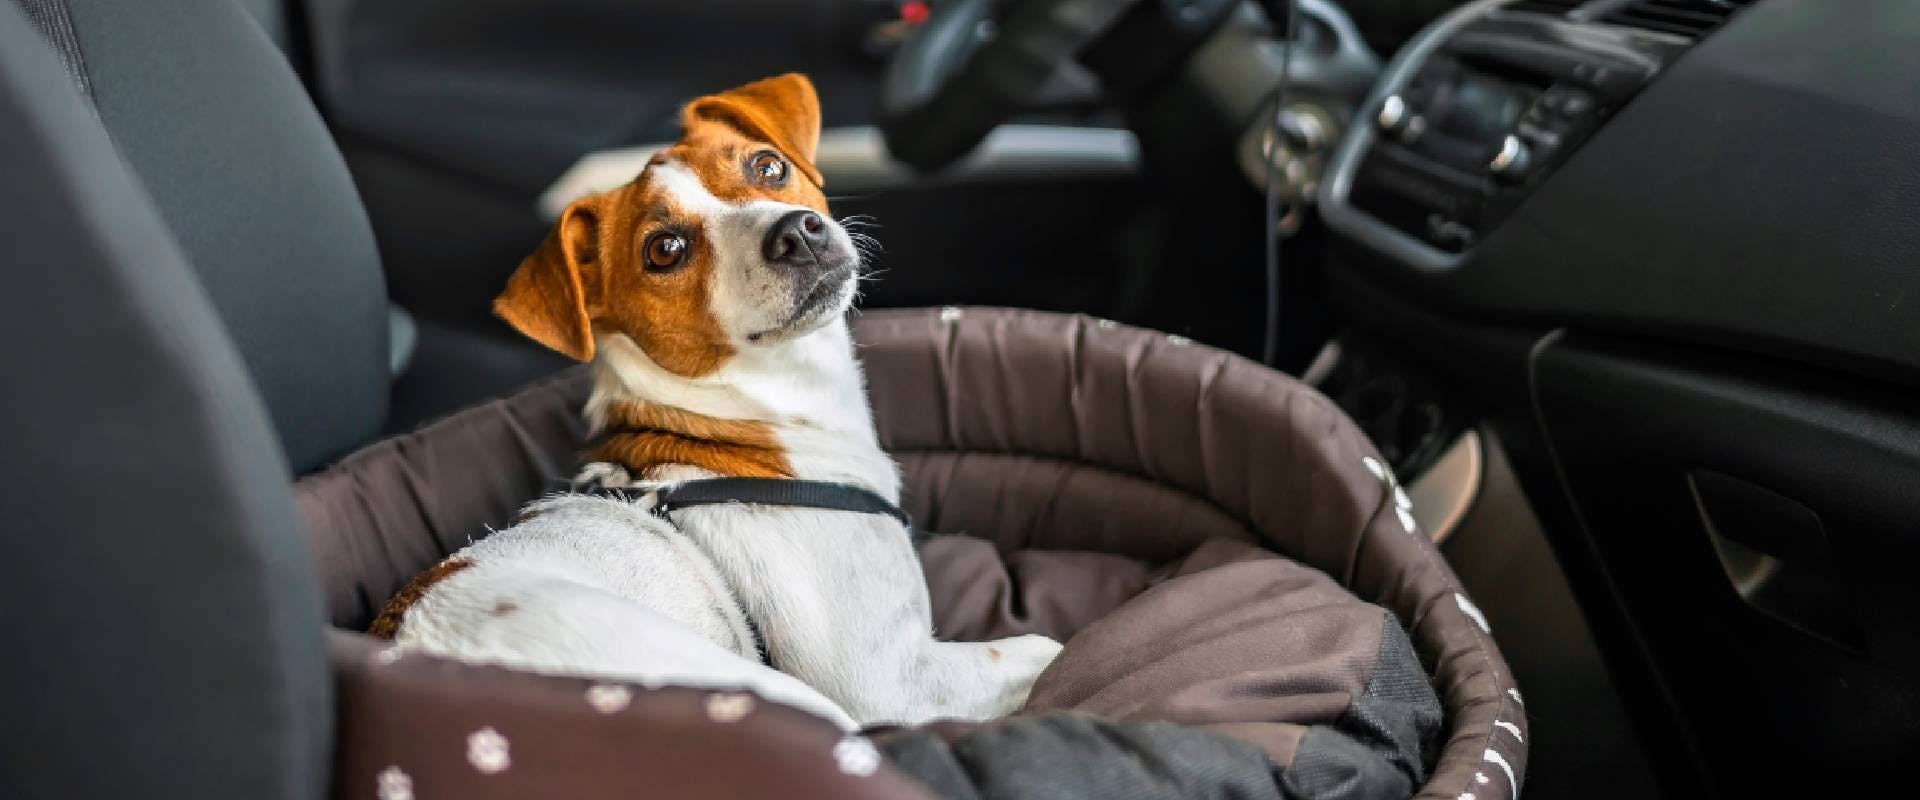 Jack Russell in a dog bed in a car